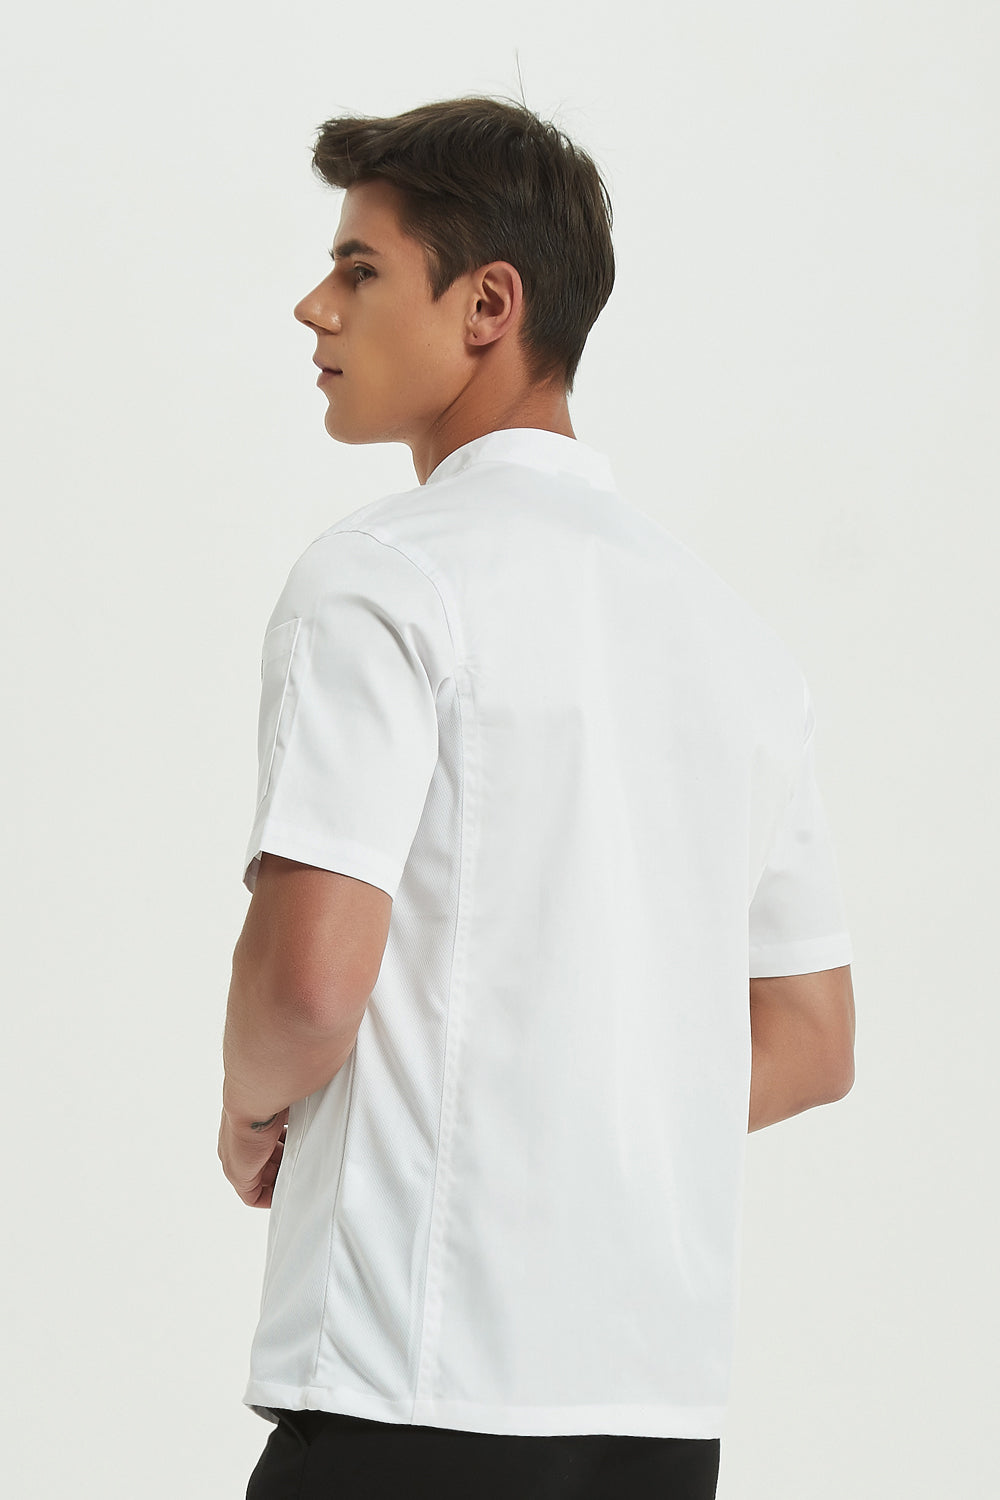 Mint White Chef Jacket with Dri-fit, Back View